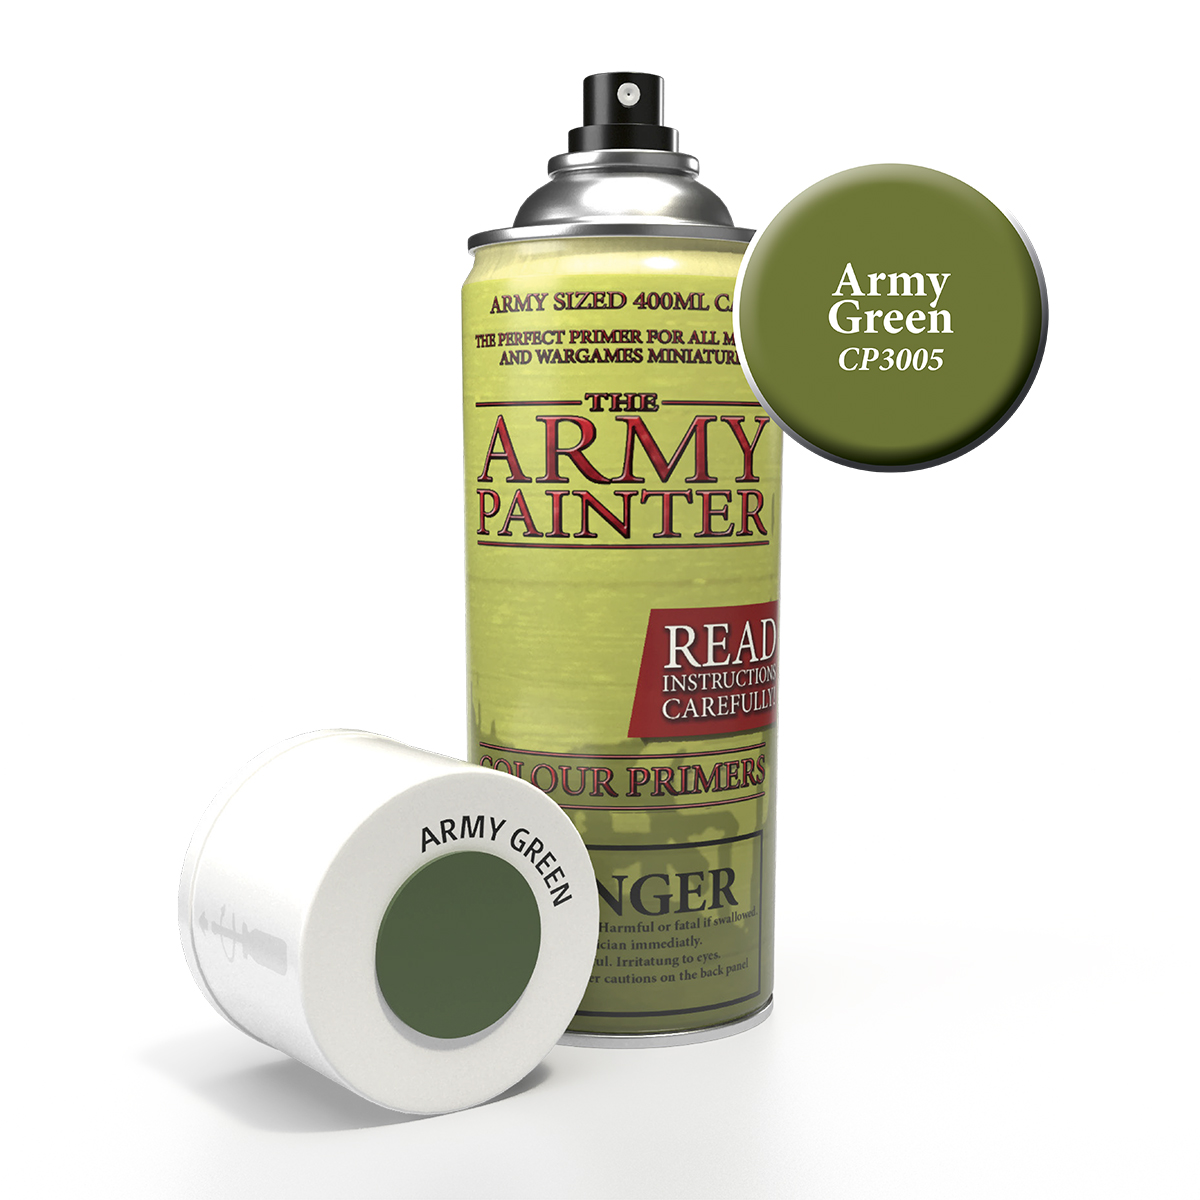 ArmyPainter Colorspray Army Green